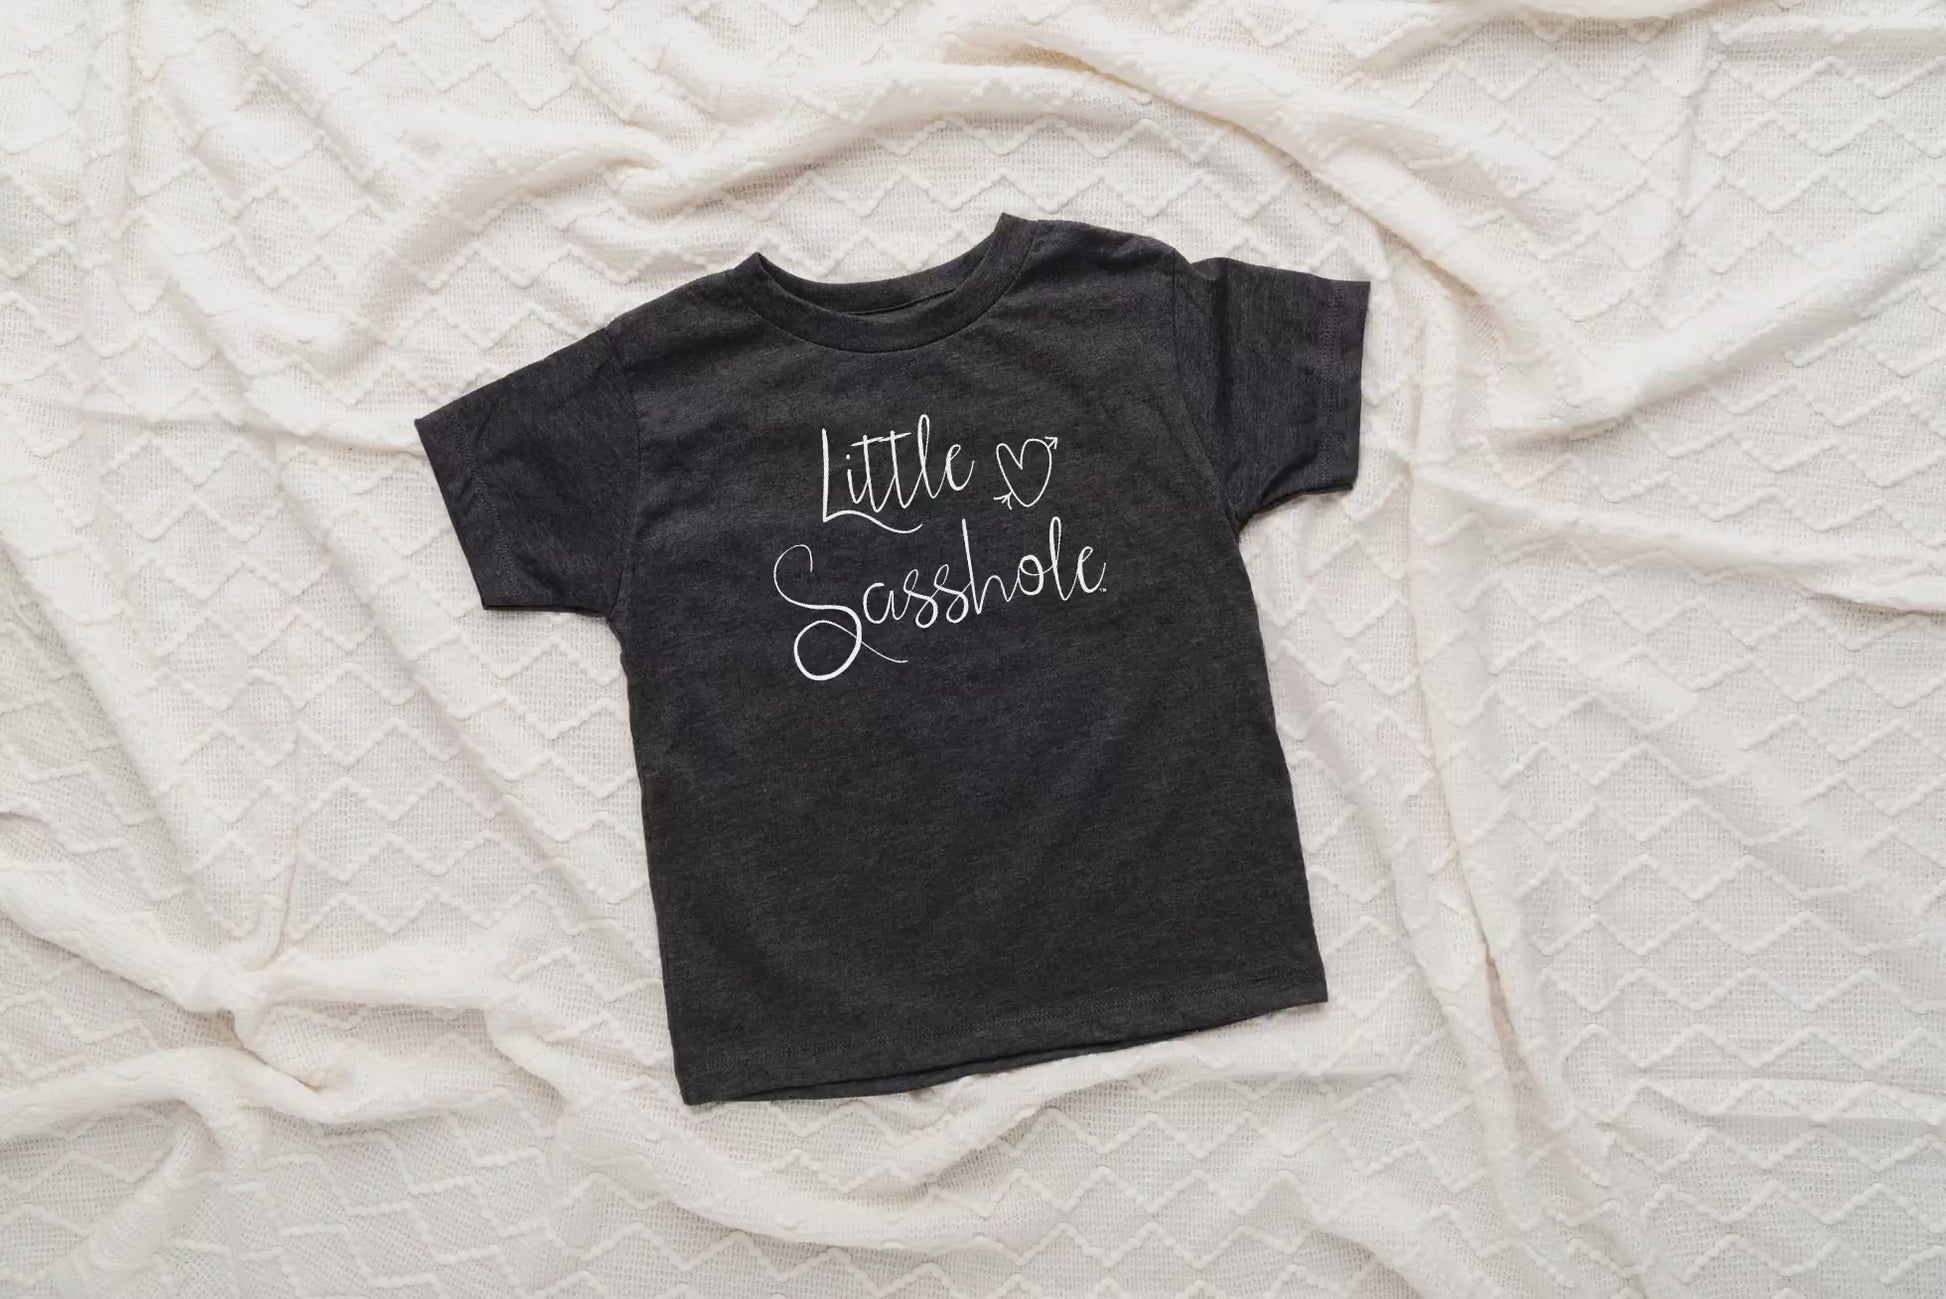 unisex toddler shirt, unique toddler gifts, trendy toddler shirt, trendy toddler fashion, Trendy toddler clothes, toddler wardrobe, toddler tshirt, toddler tops, toddler to shirts, toddler to shirt, toddler t-shirts, toddler t-shirt, toddler summer clothing, toddler style, toddler street fashion, toddler statement shirt, toddler spring fashion, toddler shirts, toddler shirt, Toddler sayings shirts